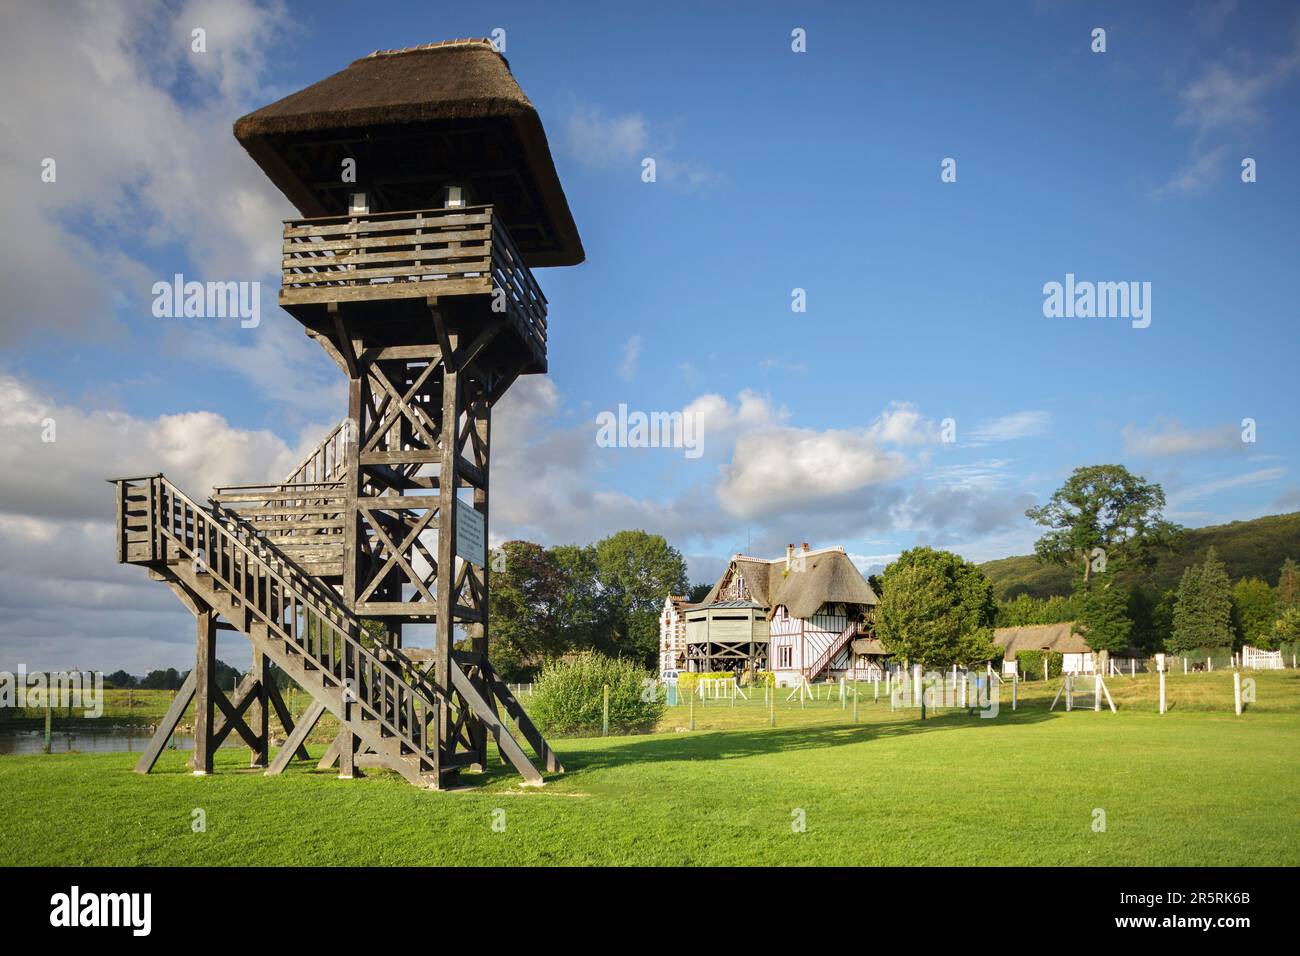 France, Eure, Sainte-Opportune-la-Mare, Marais-Vernier National Nature Reserve, Grand'Mare observation tower, managed by the Eure Departmental Hunters Federation Stock Photo